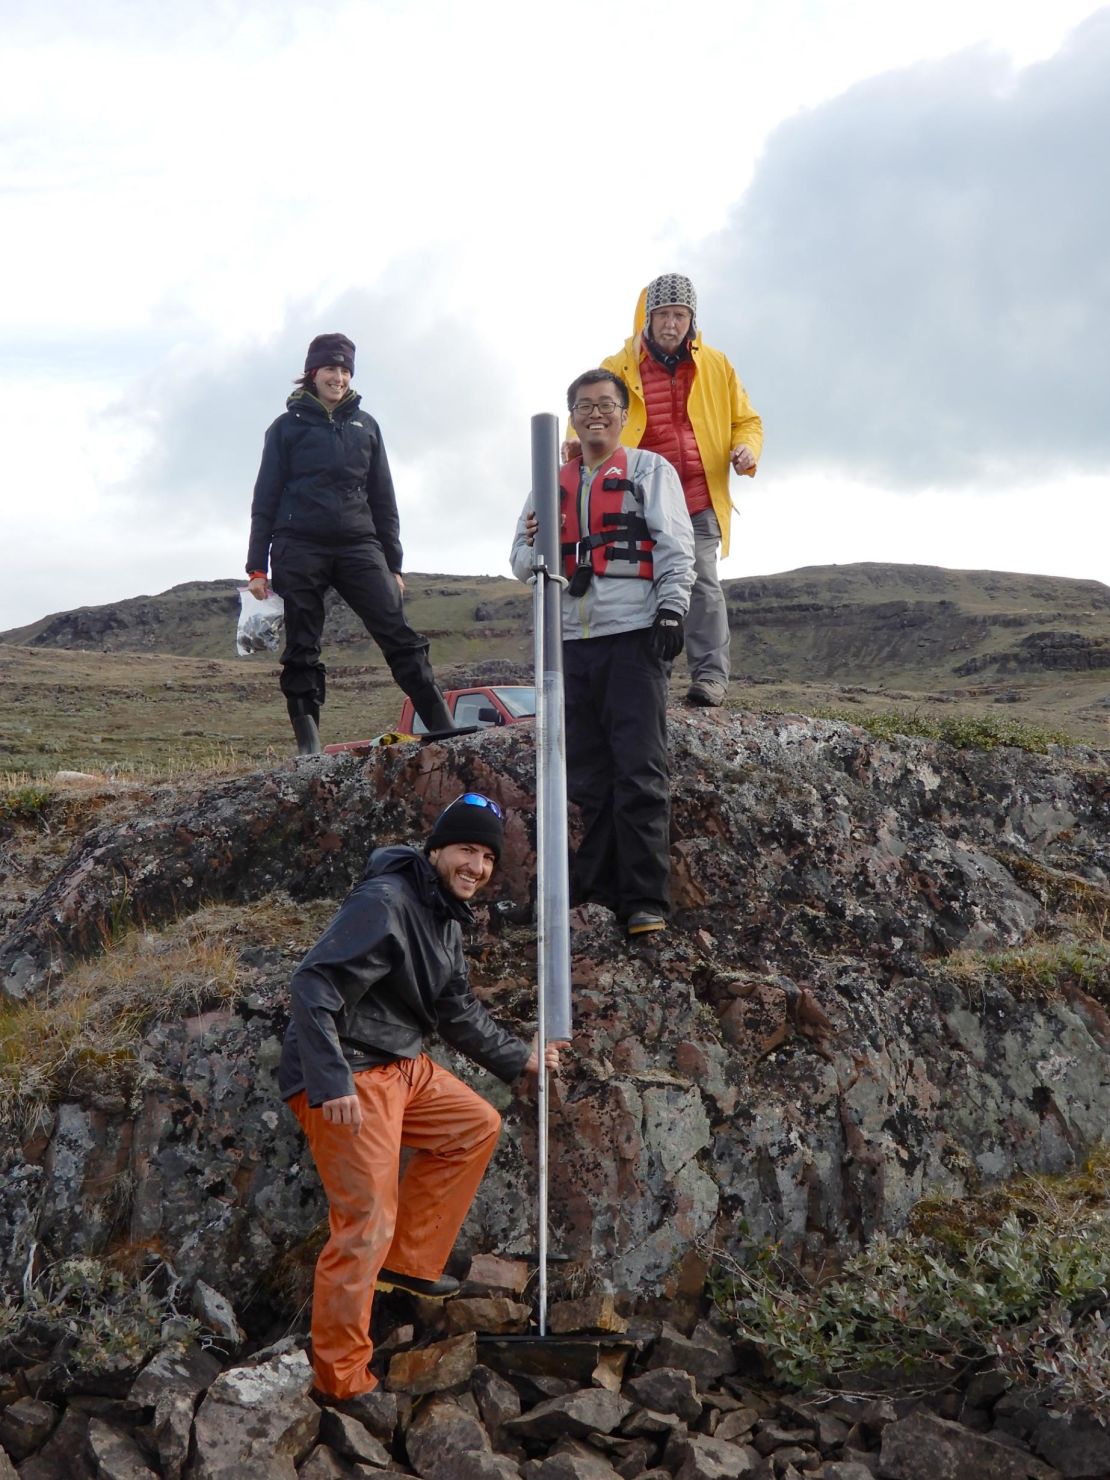 The research team, including (counterclockwise from left) Isla Castañeda, Tobias Schneider, Boyang Zhao and Raymond Bradley, are seen collecting lake sediment cores in southern Greenland.